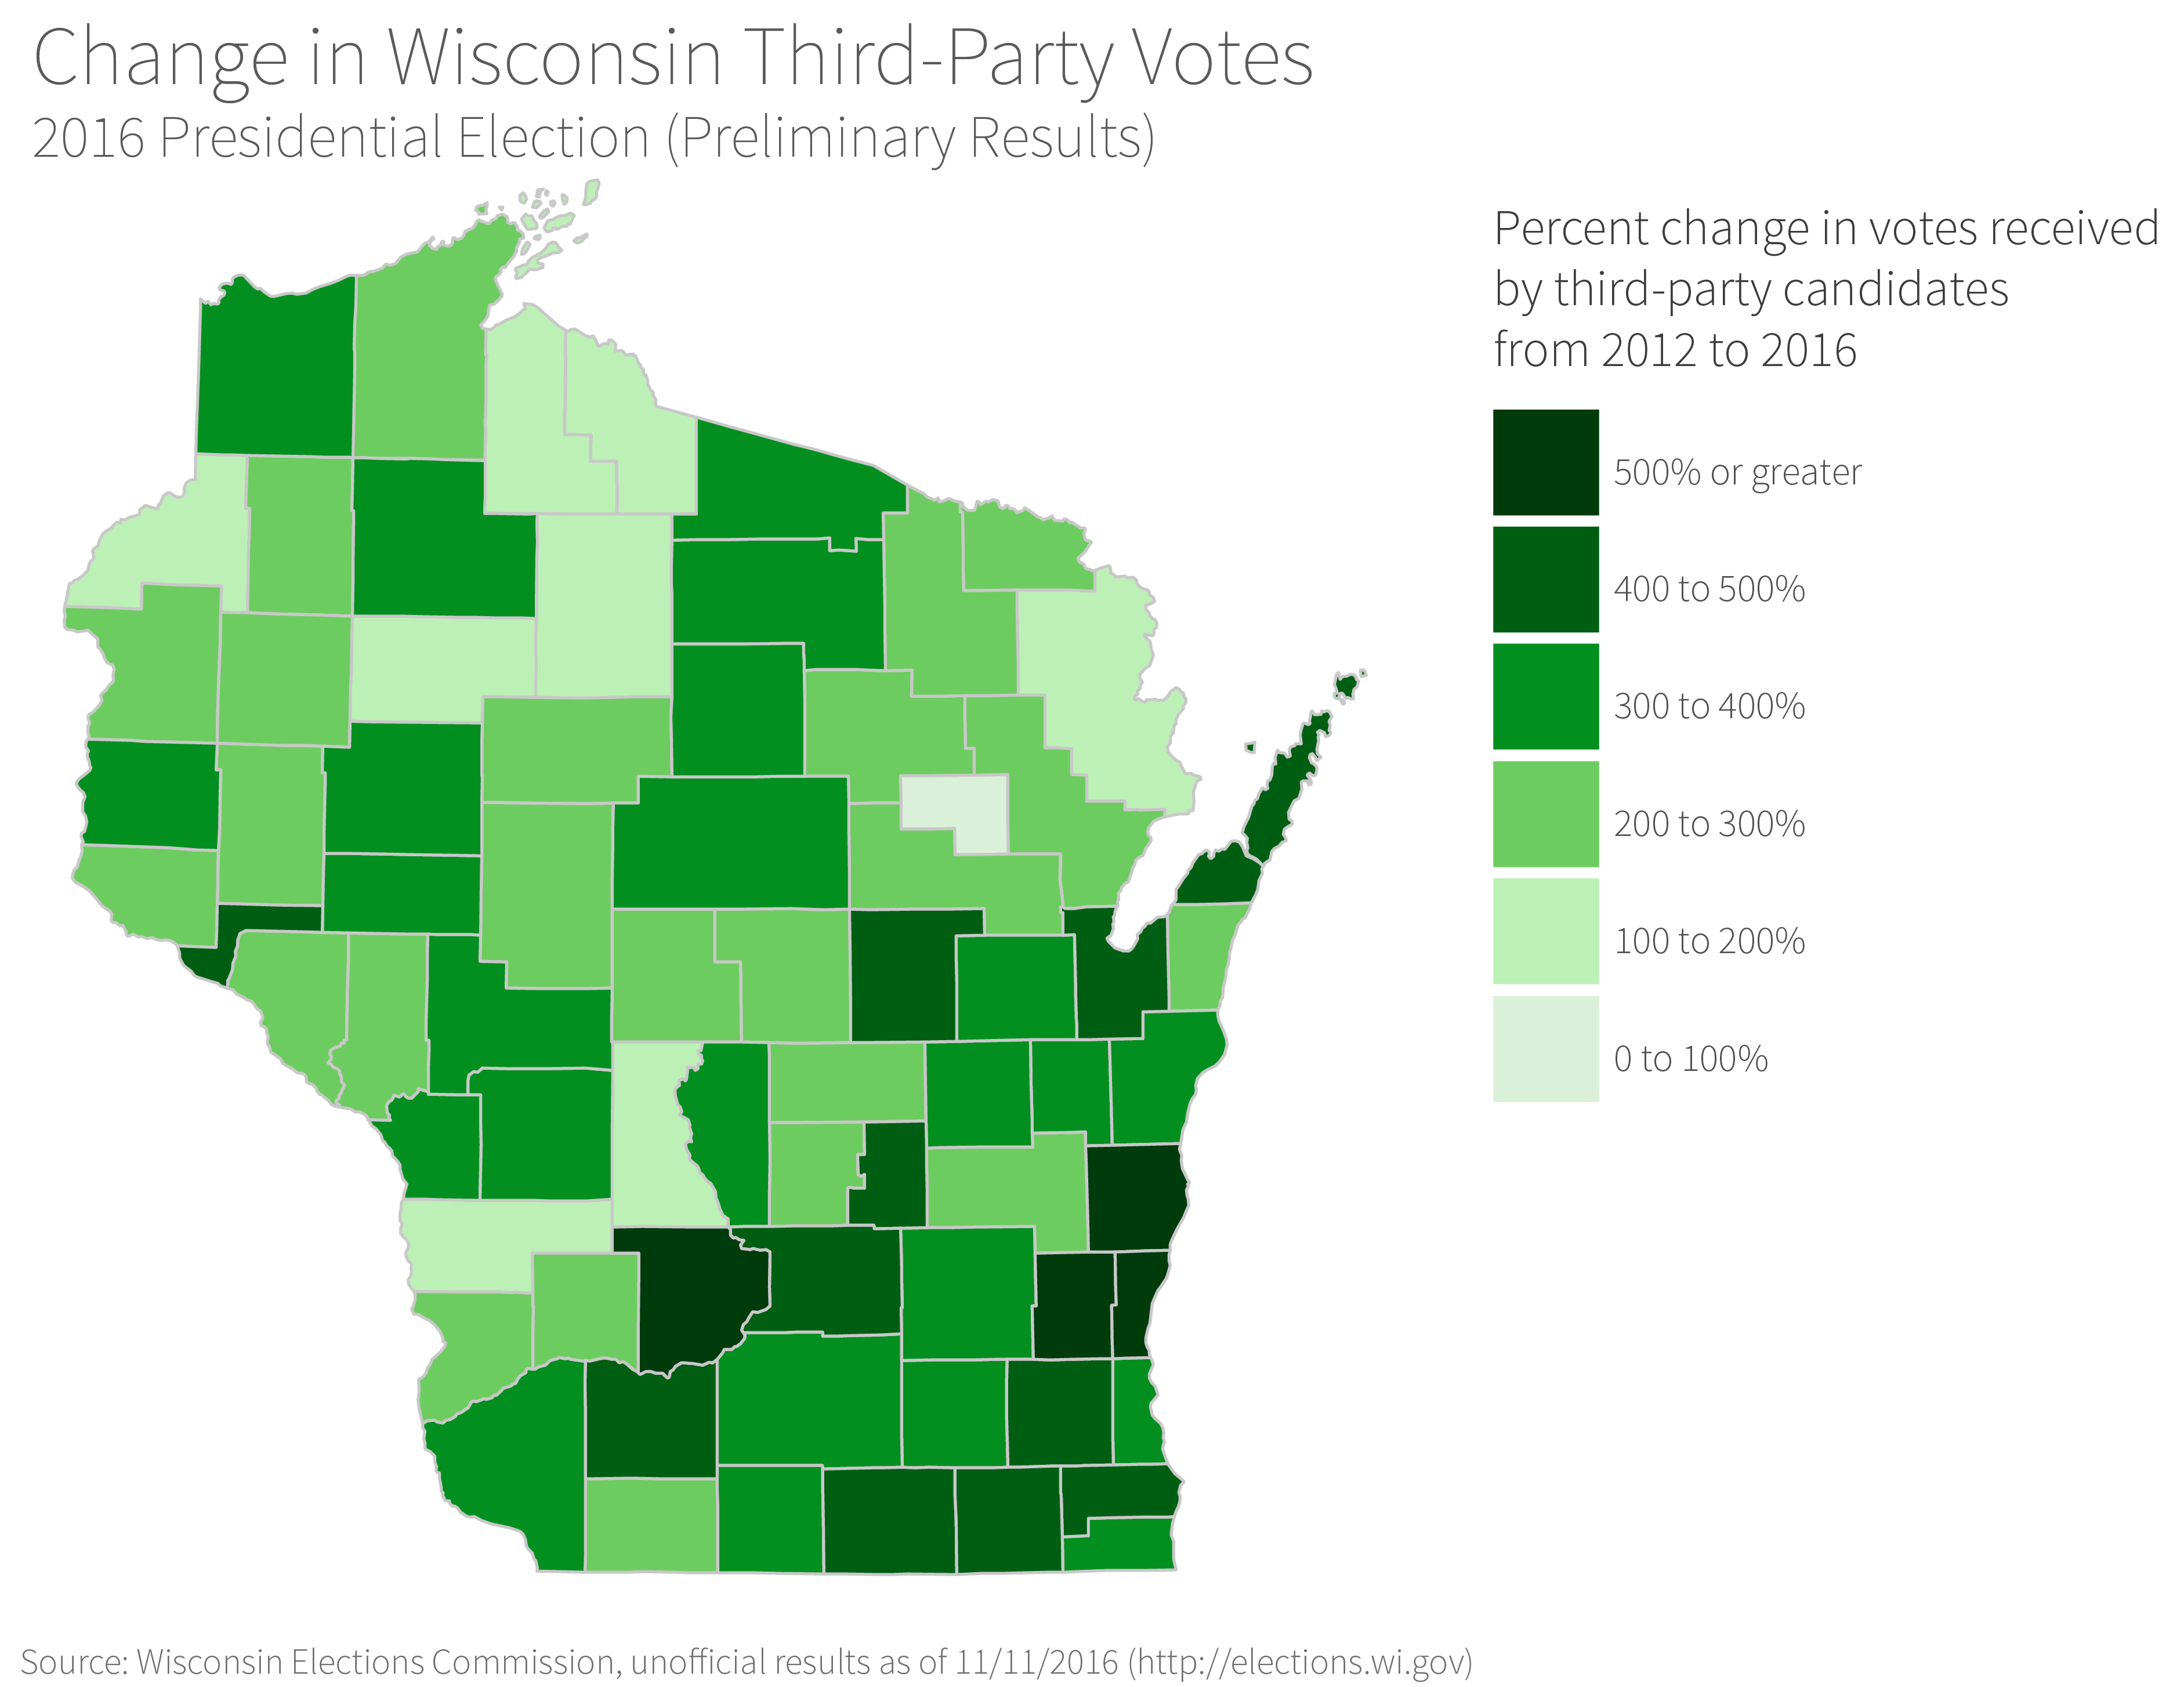 map of Wisconsin showing percent change in votes received by third party candidates, 2012 to 2016